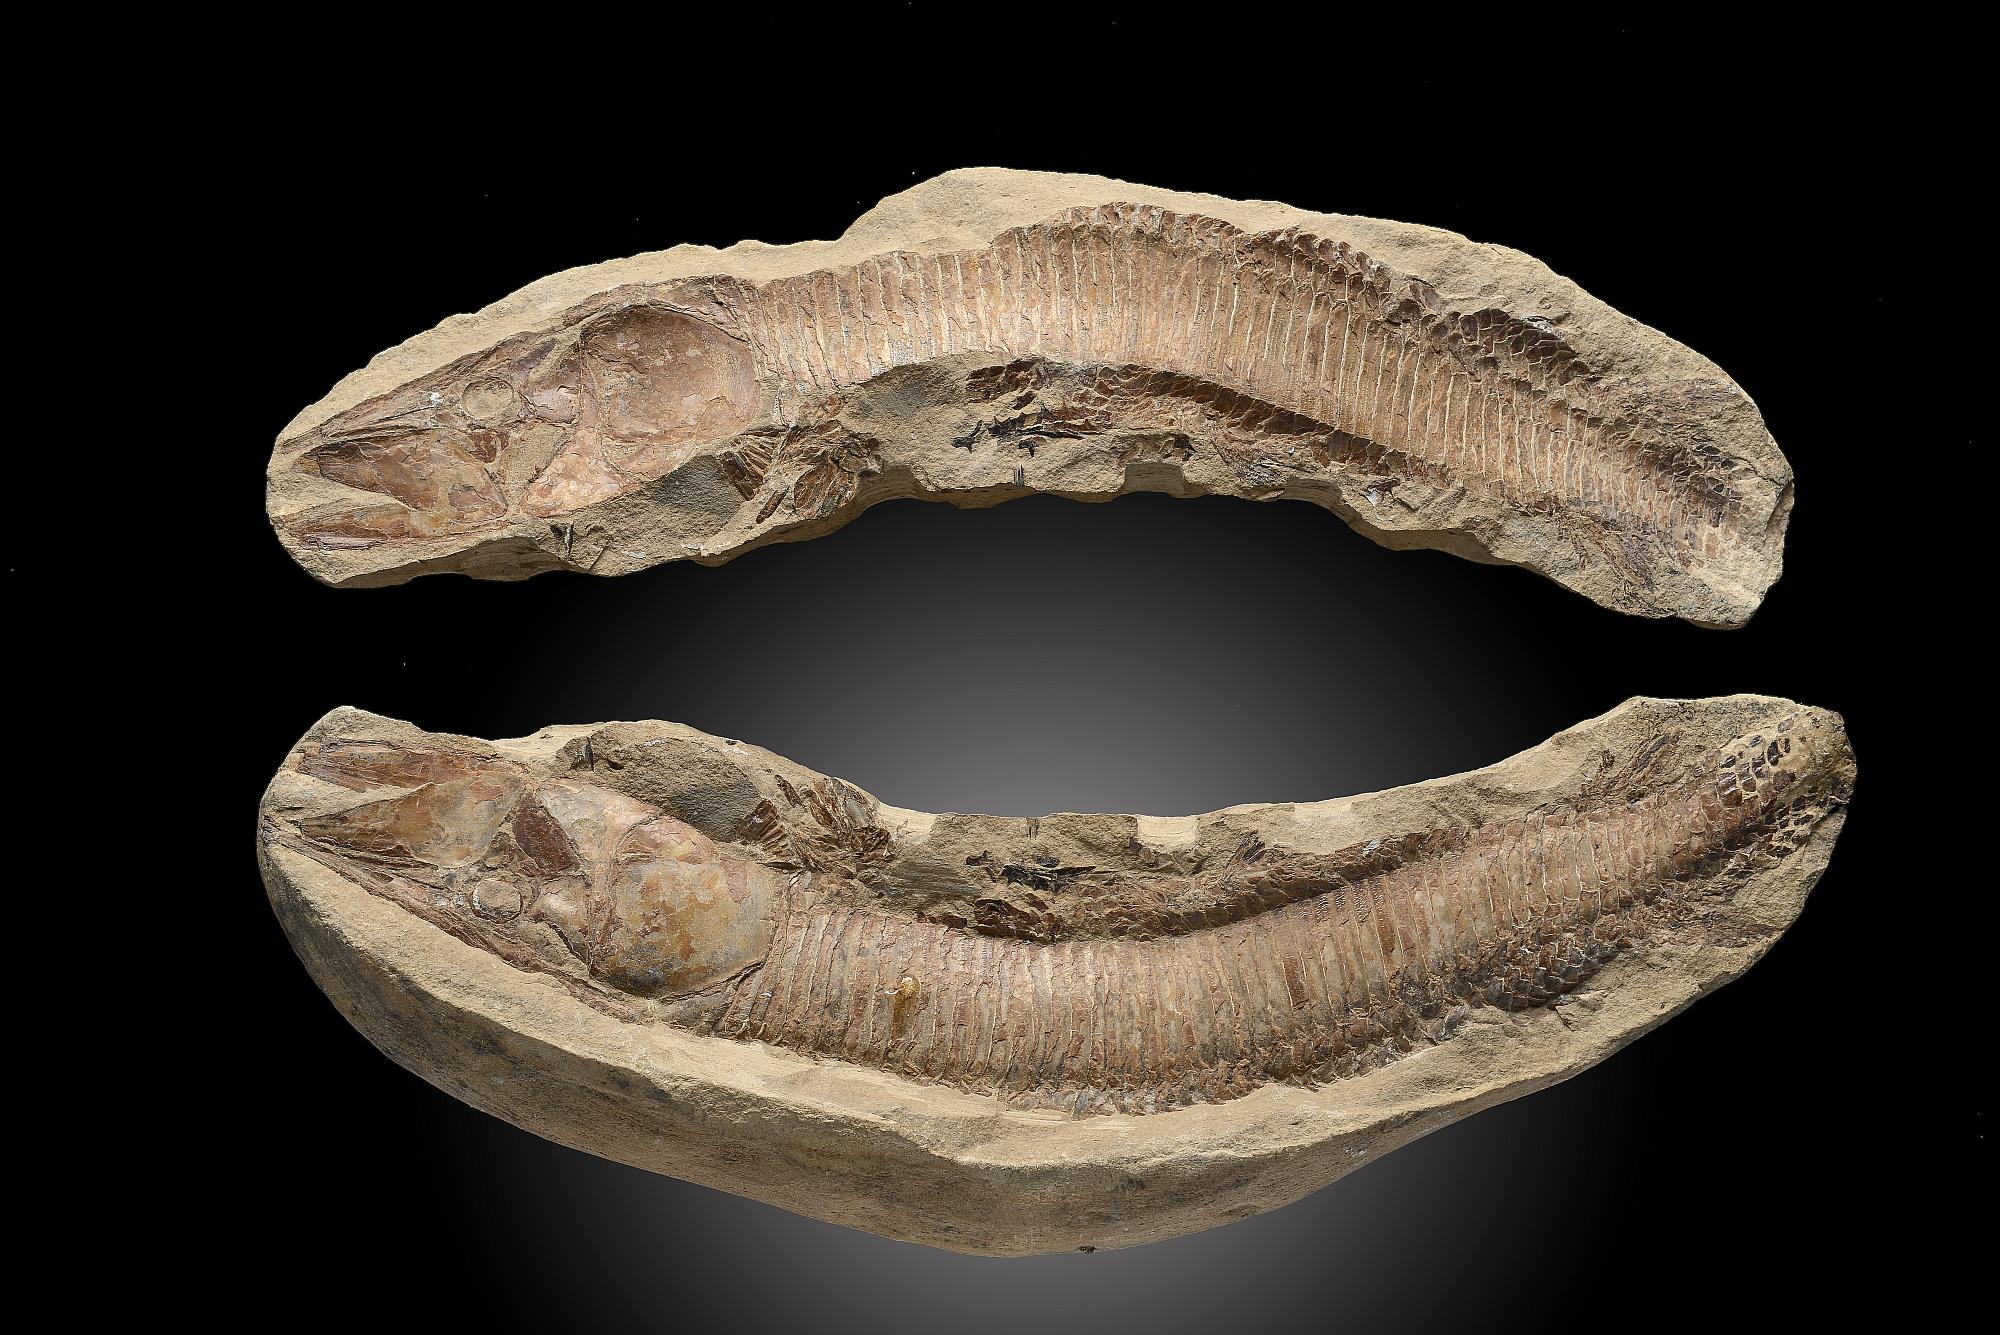 A fossil fish in positive/negative halvesSantana formation, Brazil, Cretaceous48cm.; 19ins long (See